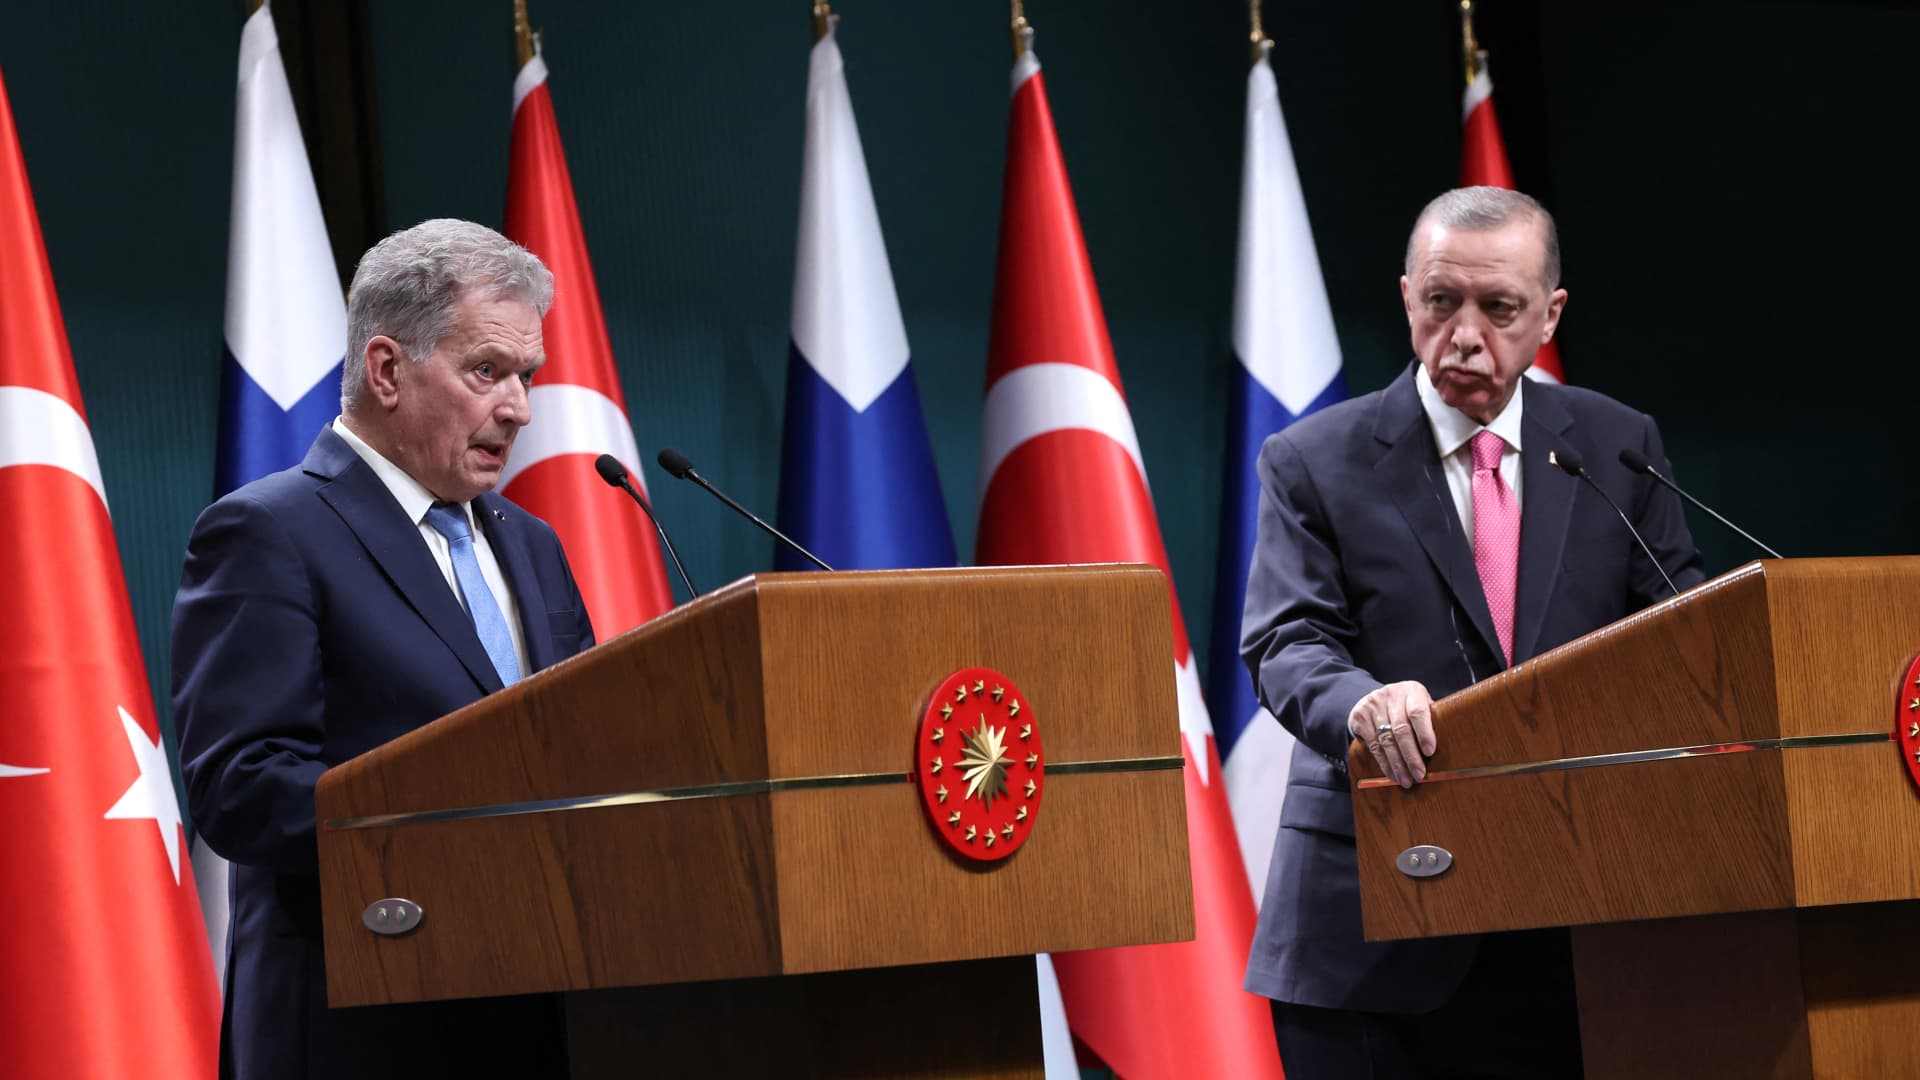 Turkish President Recep Tayyip Erdogan (R) and Finnish President Sauli Niinisto (L) deliver a joint press conference held after their meeting at the Presidential Complex in Ankara, on March 17, 2023.